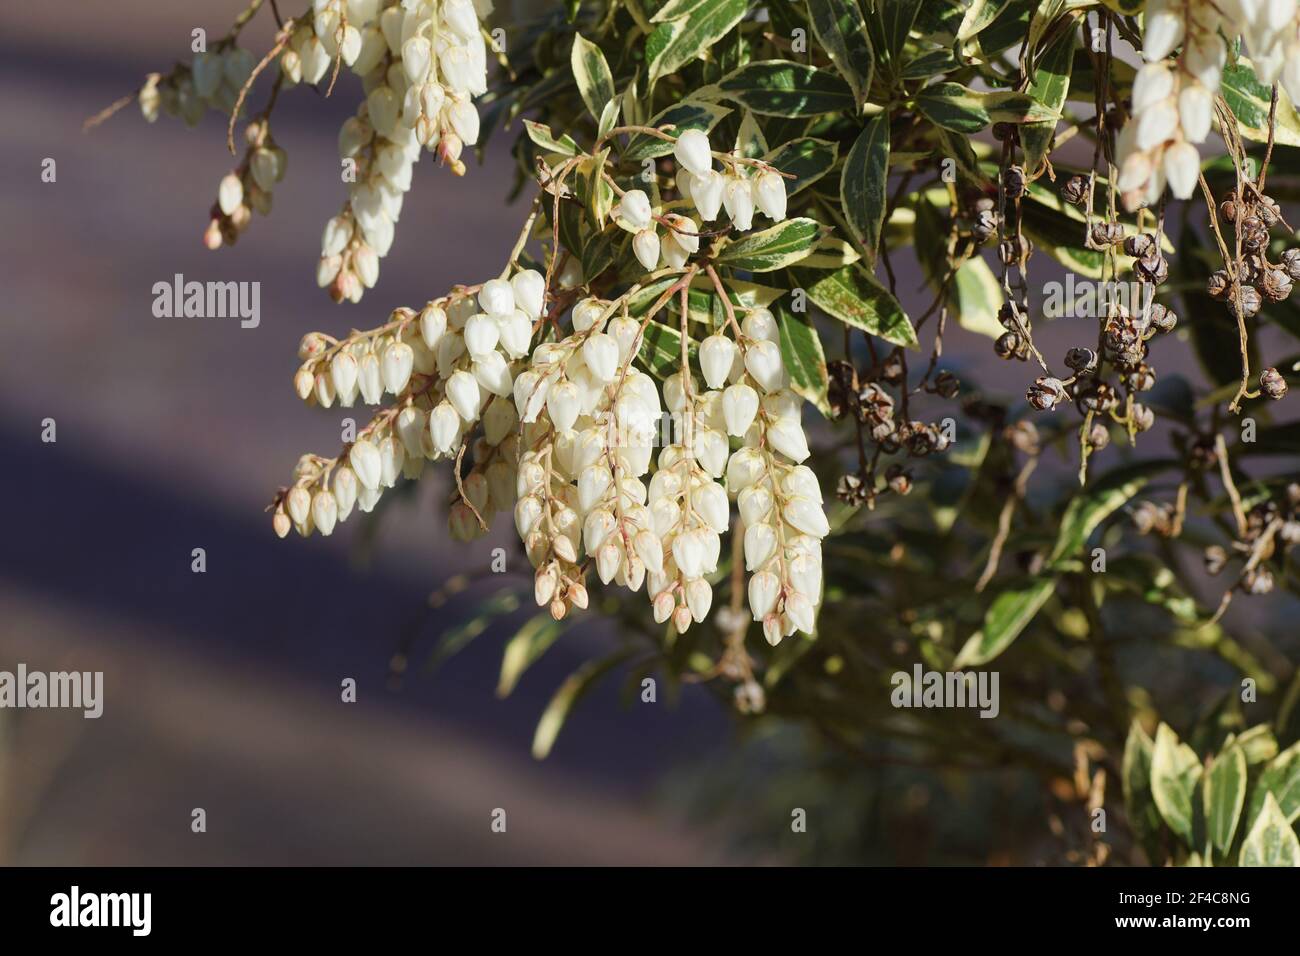 Pieris (Pieris japonica variegata). Heath, heather family (Ericaceae). Flowering in the end of the winter, spring. Variegated and green foliage Stock Photo